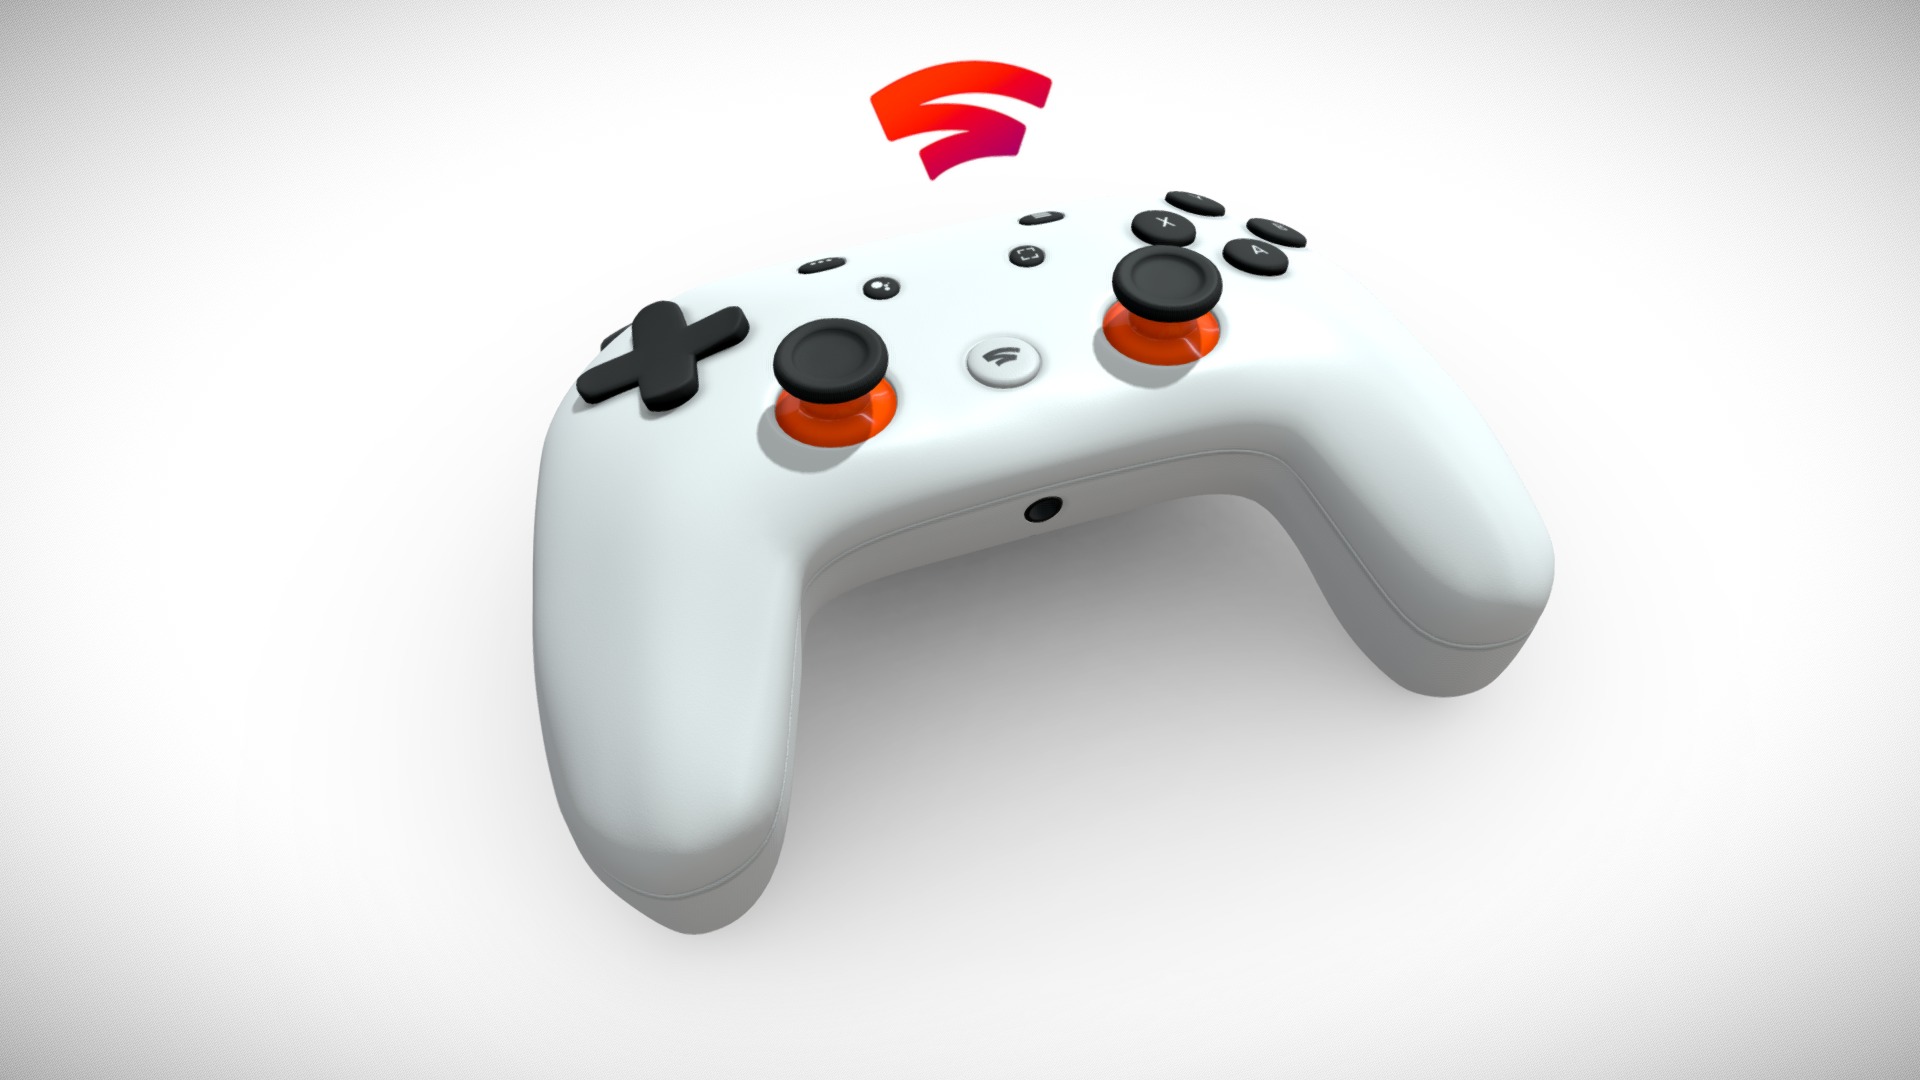 3D model Google Stadia Controller – "Clearly White" - This is a 3D model of the Google Stadia Controller - "Clearly White". The 3D model is about a white video game controller.